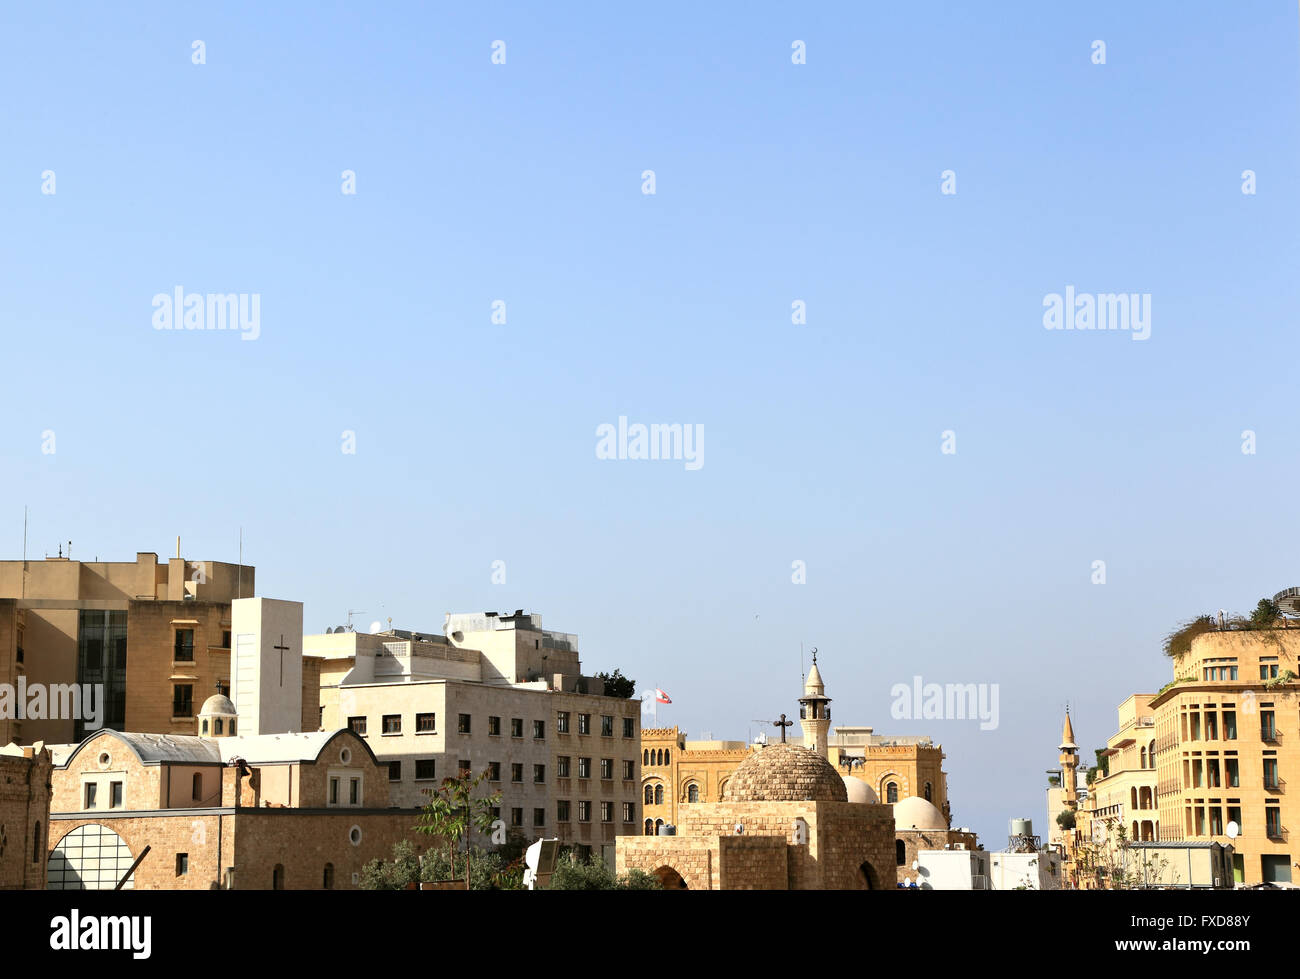 Beirut Skyline with copy space Stock Photo